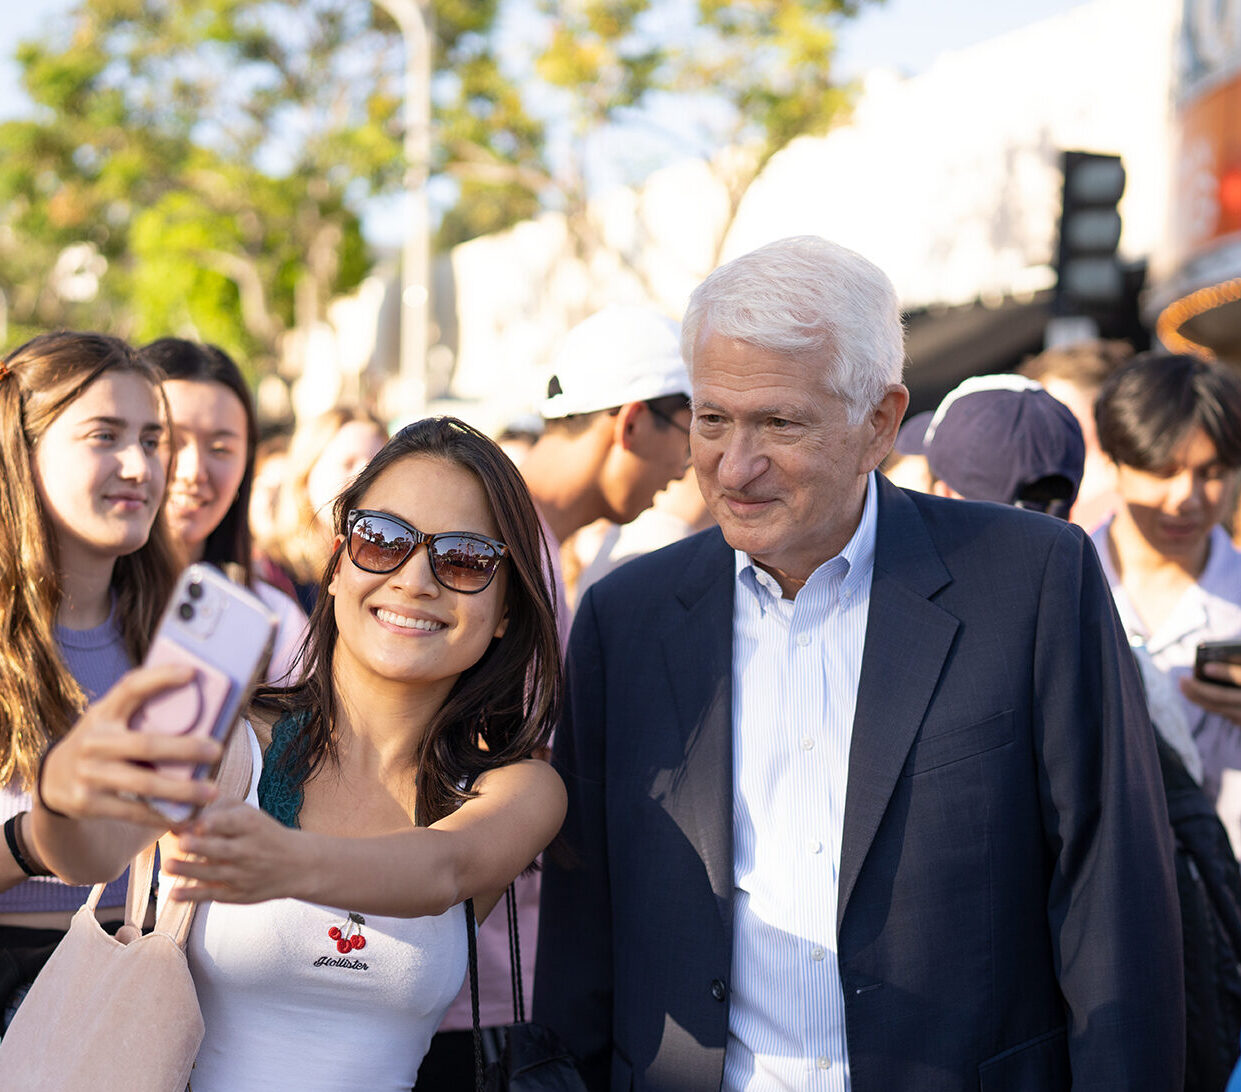 A female student in sunglasses holds her phone out to take a selfie with Chancellor Block in a crowd.